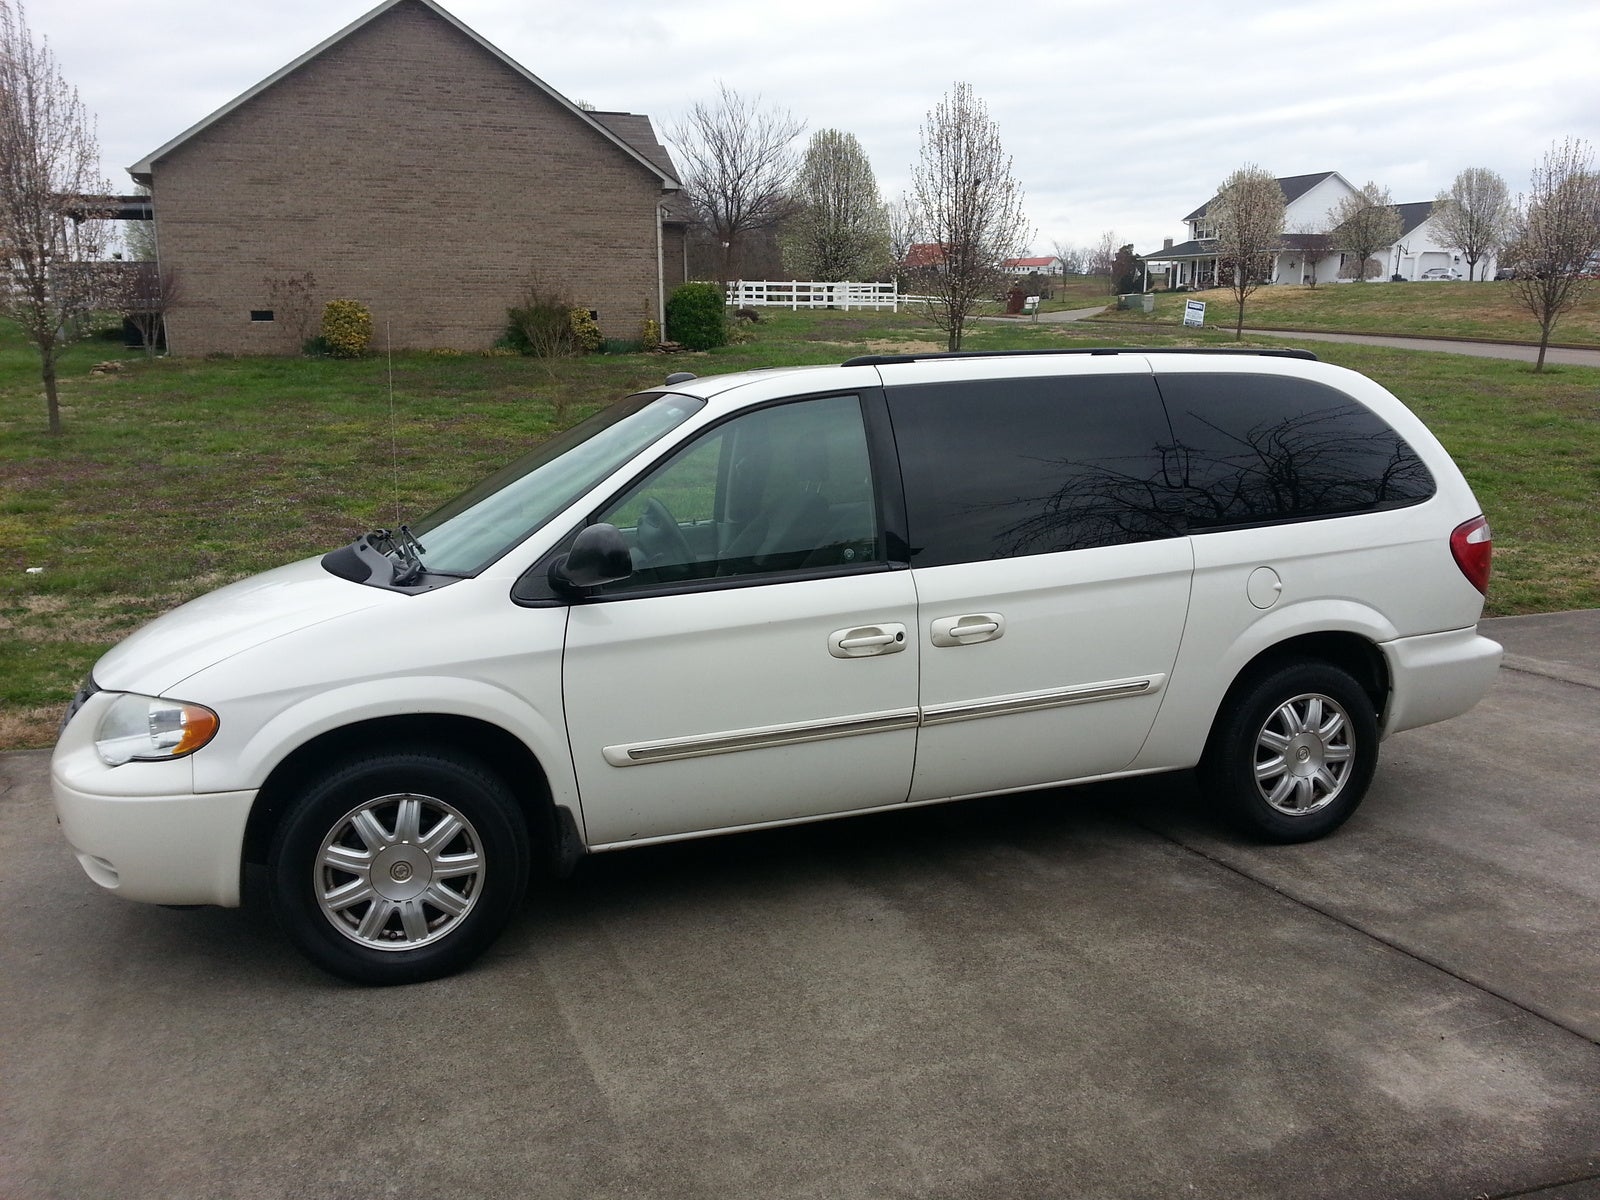 2005 Chrysler Town & Country Pictures CarGurus